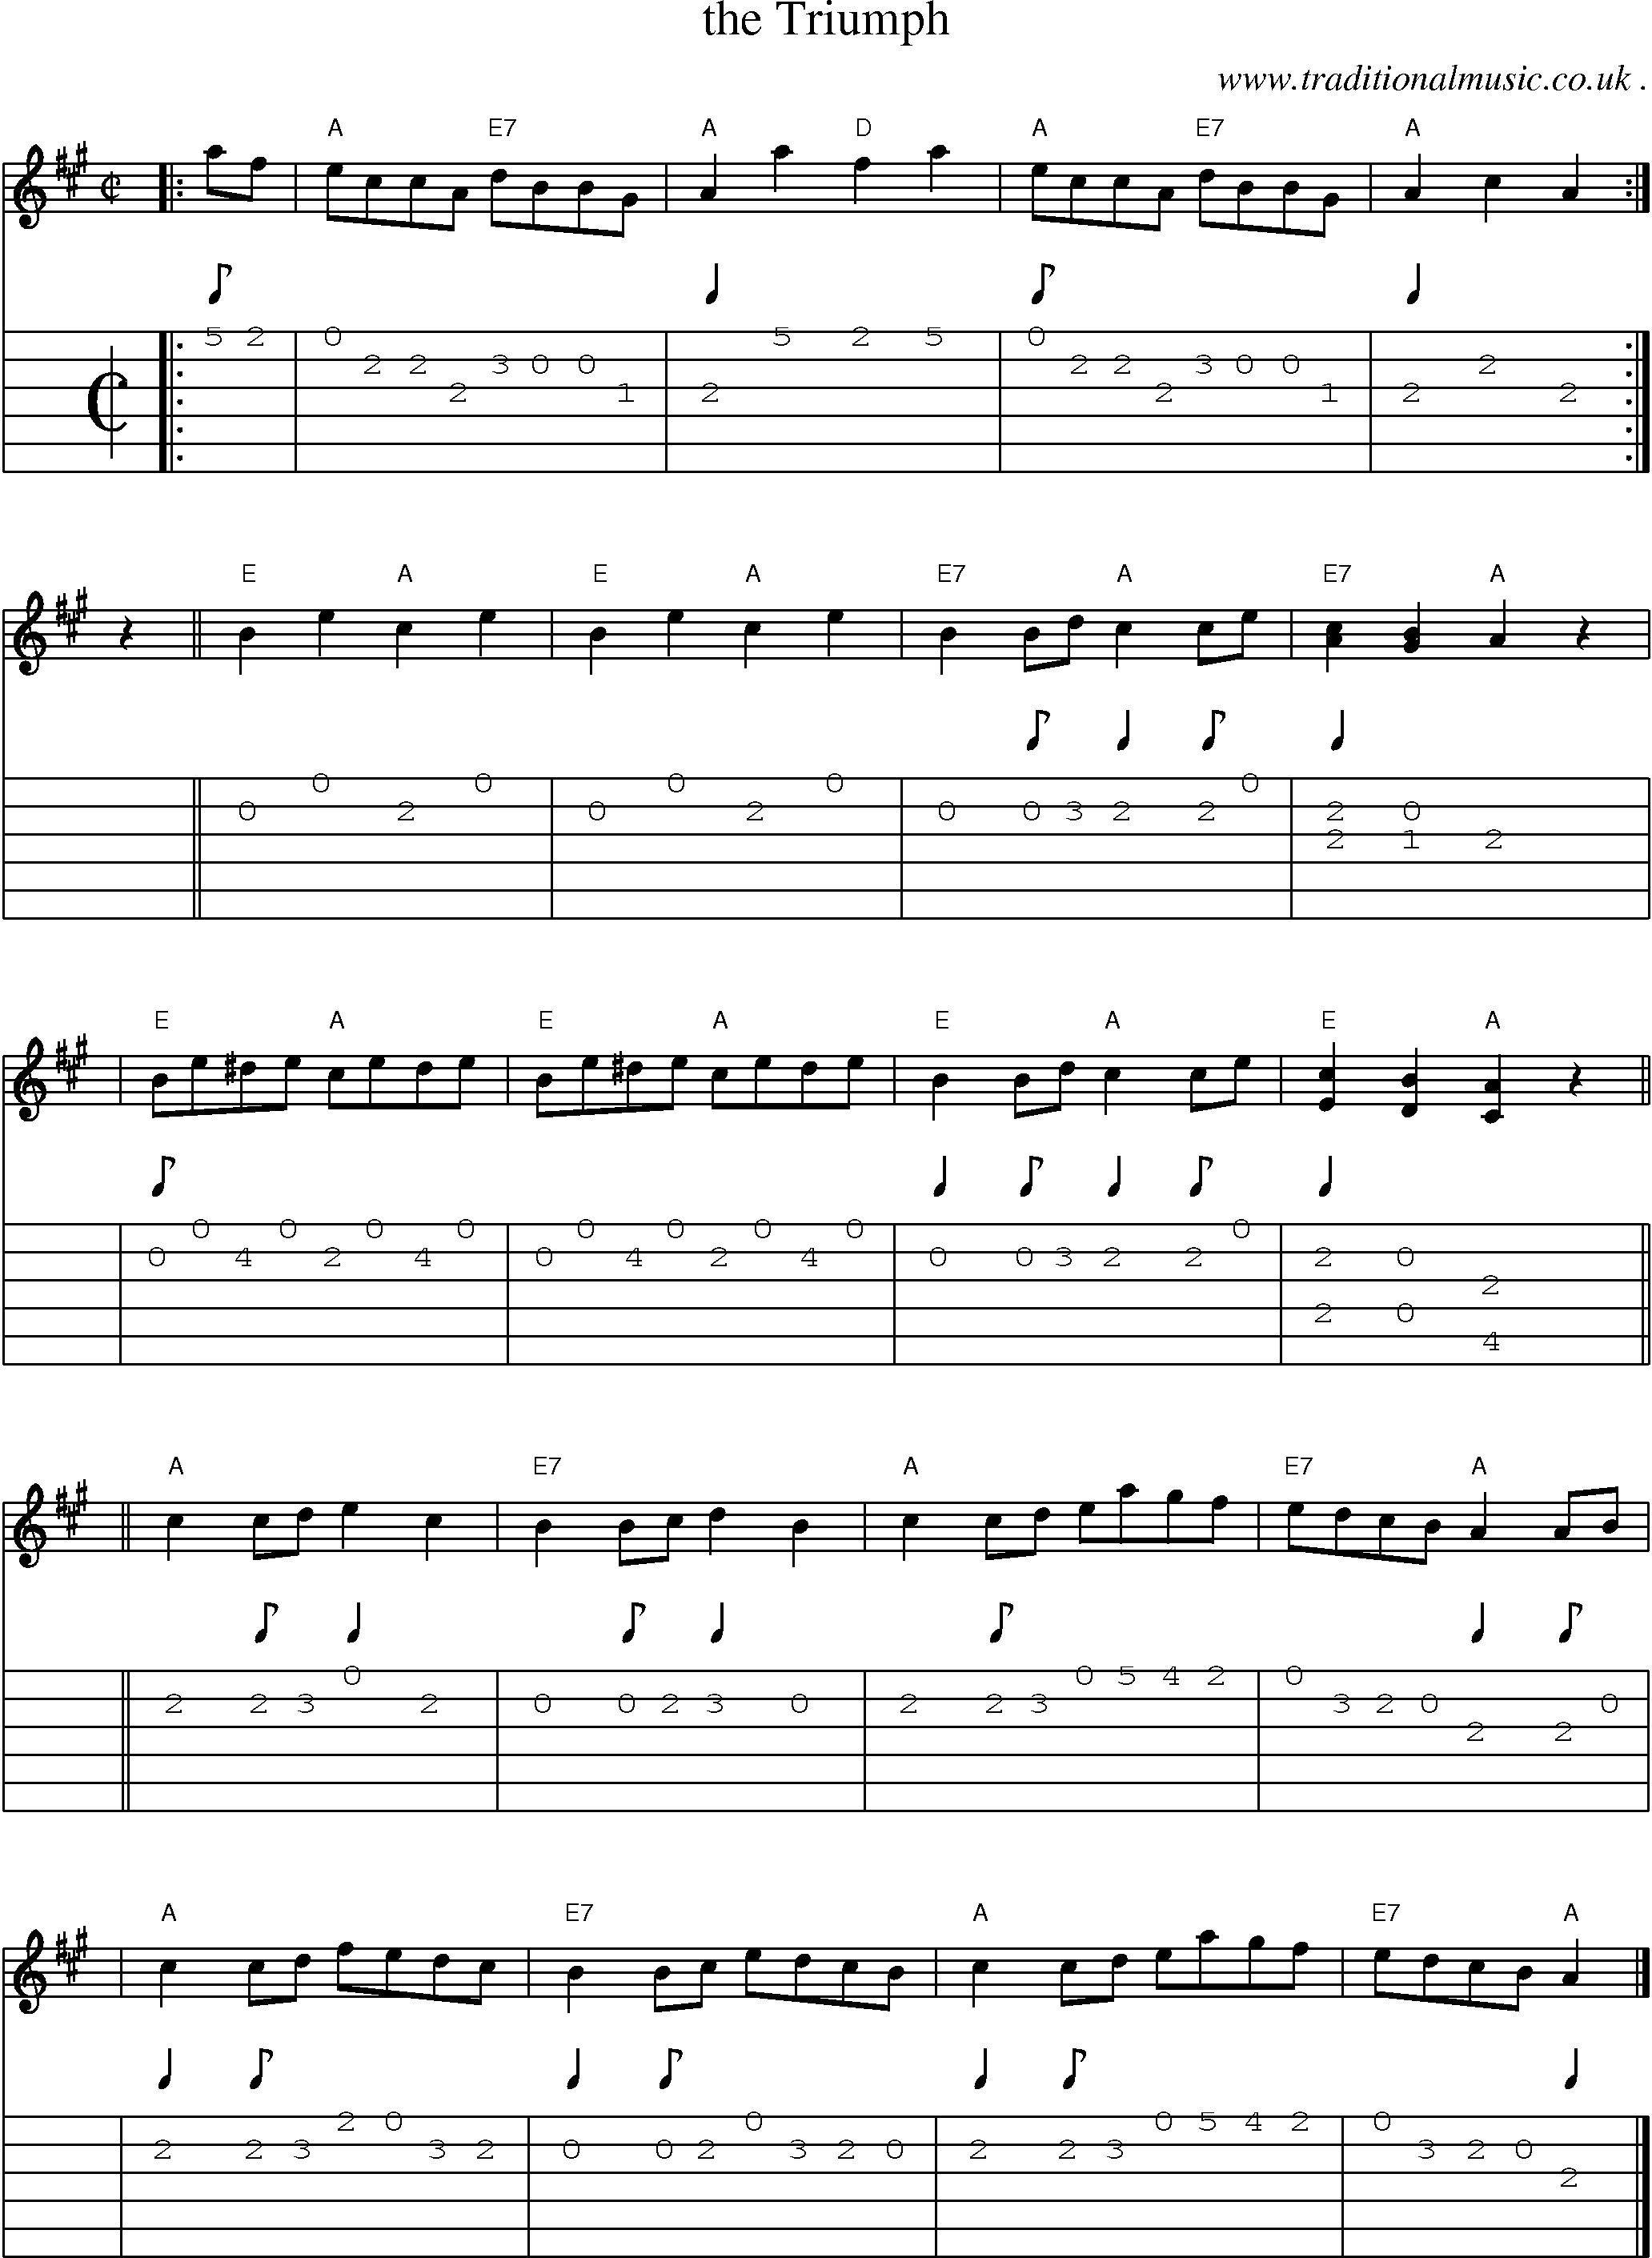 Sheet-music  score, Chords and Guitar Tabs for The Triumph